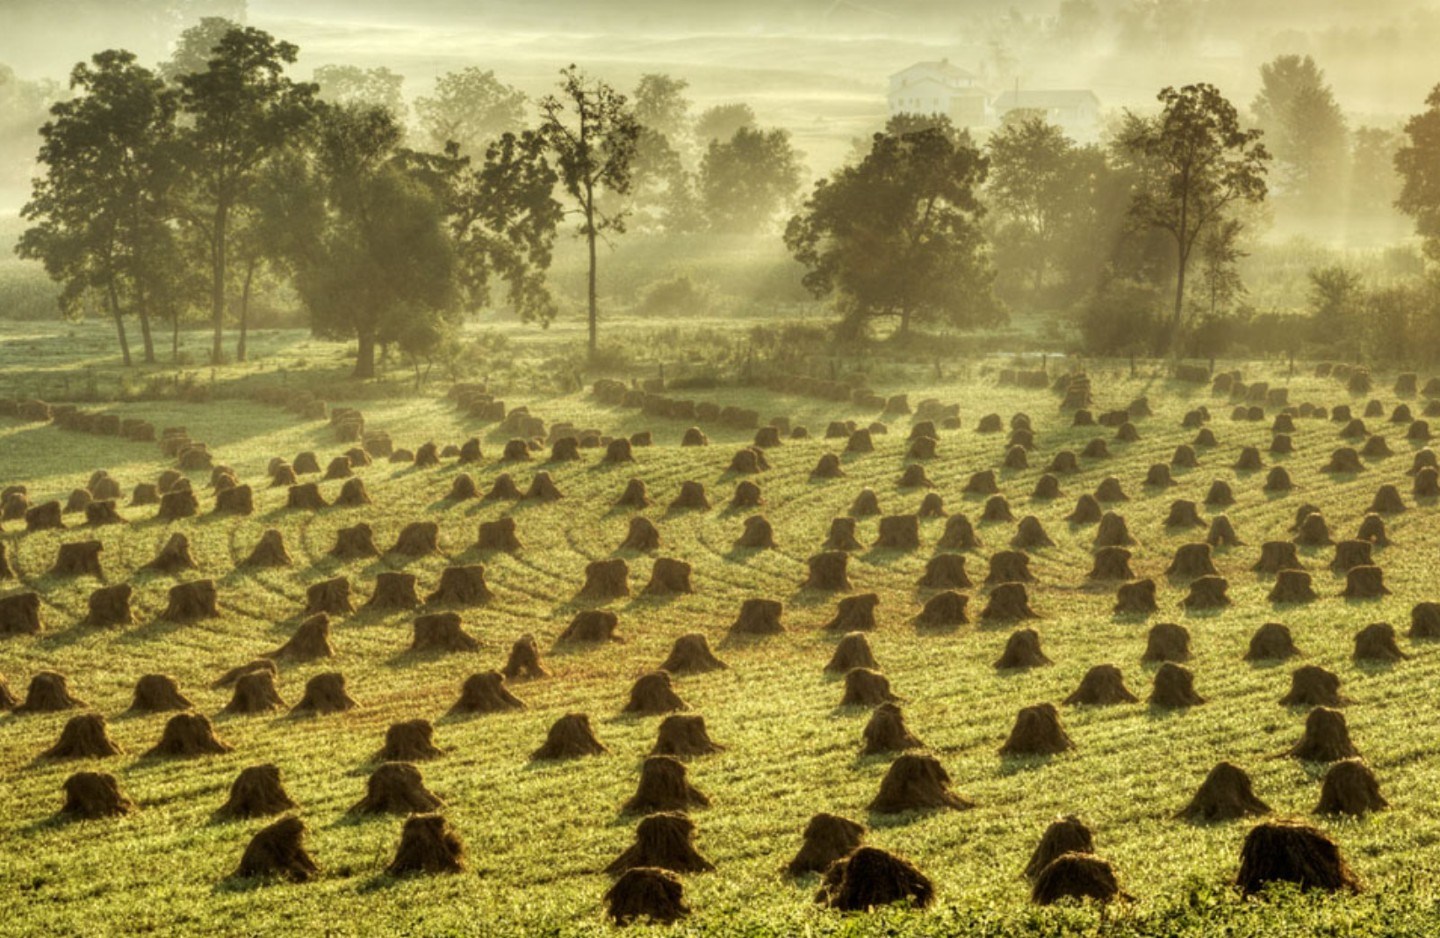 Plowed field with hundreds of small haystacks